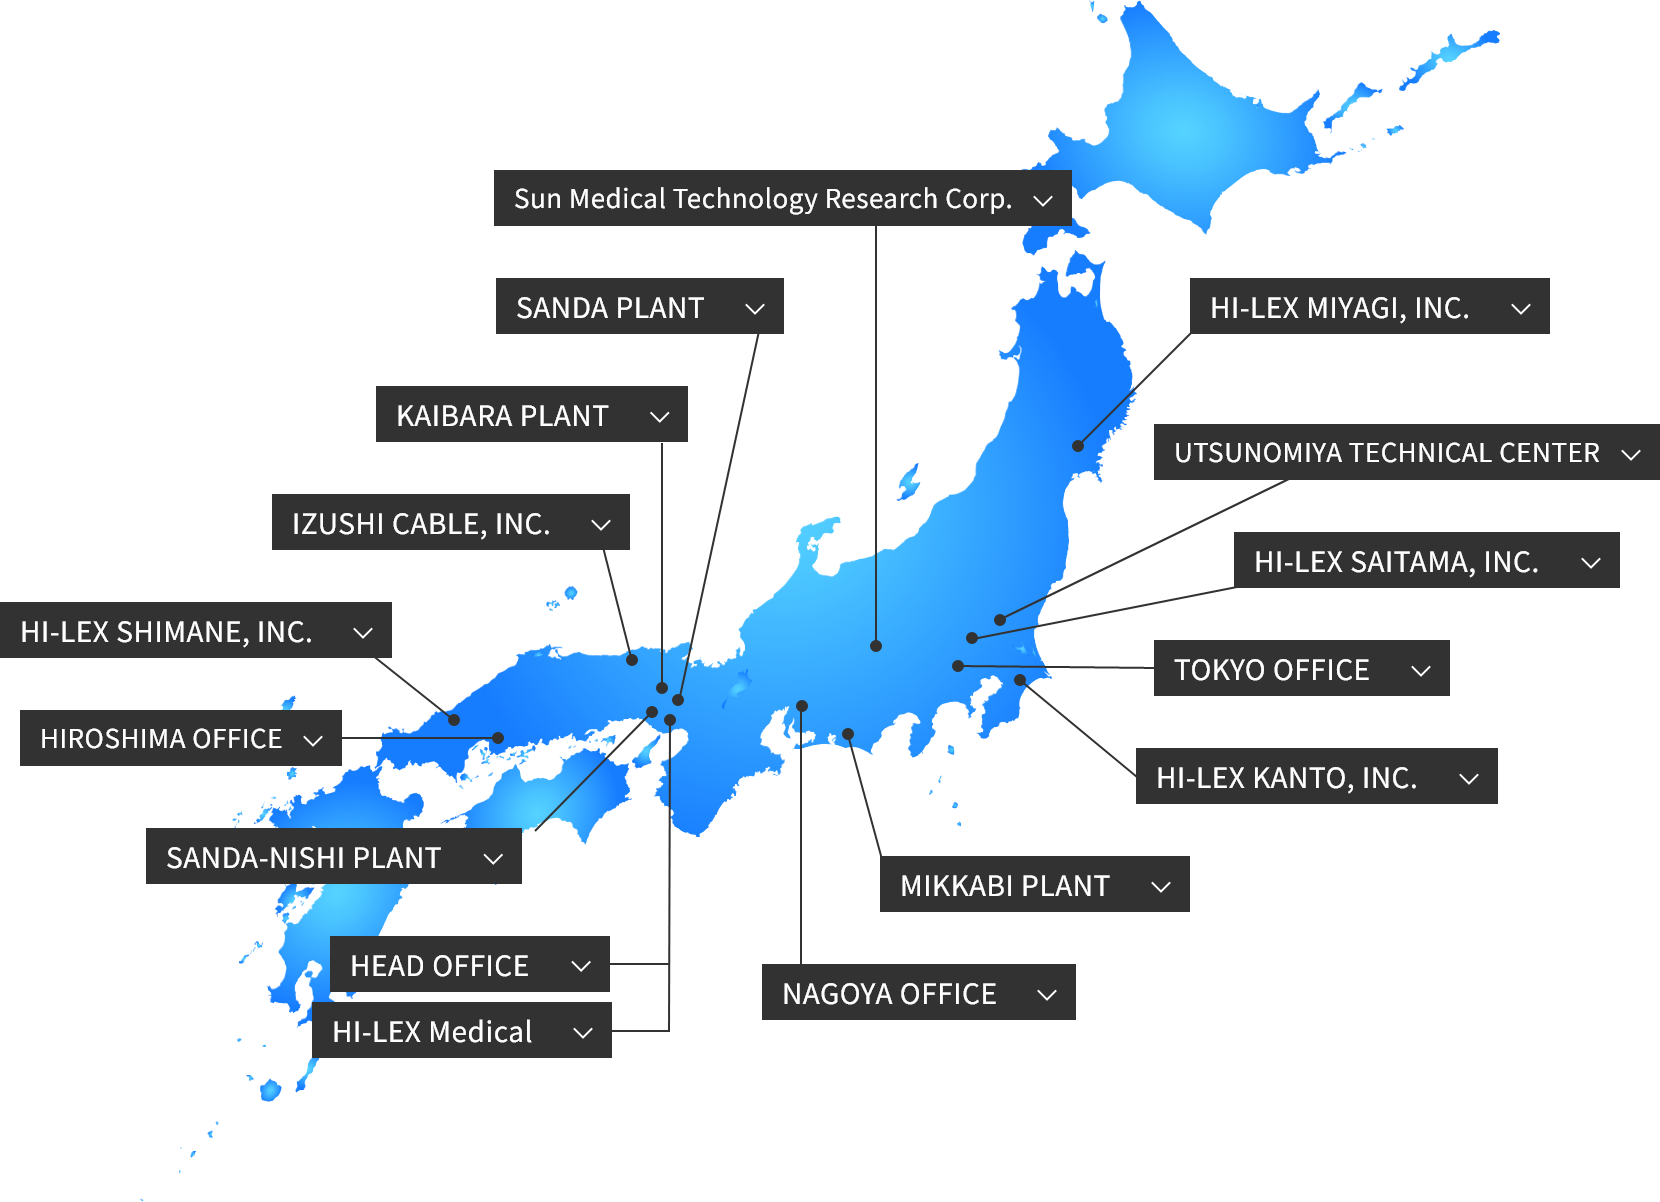 Operations in Japan